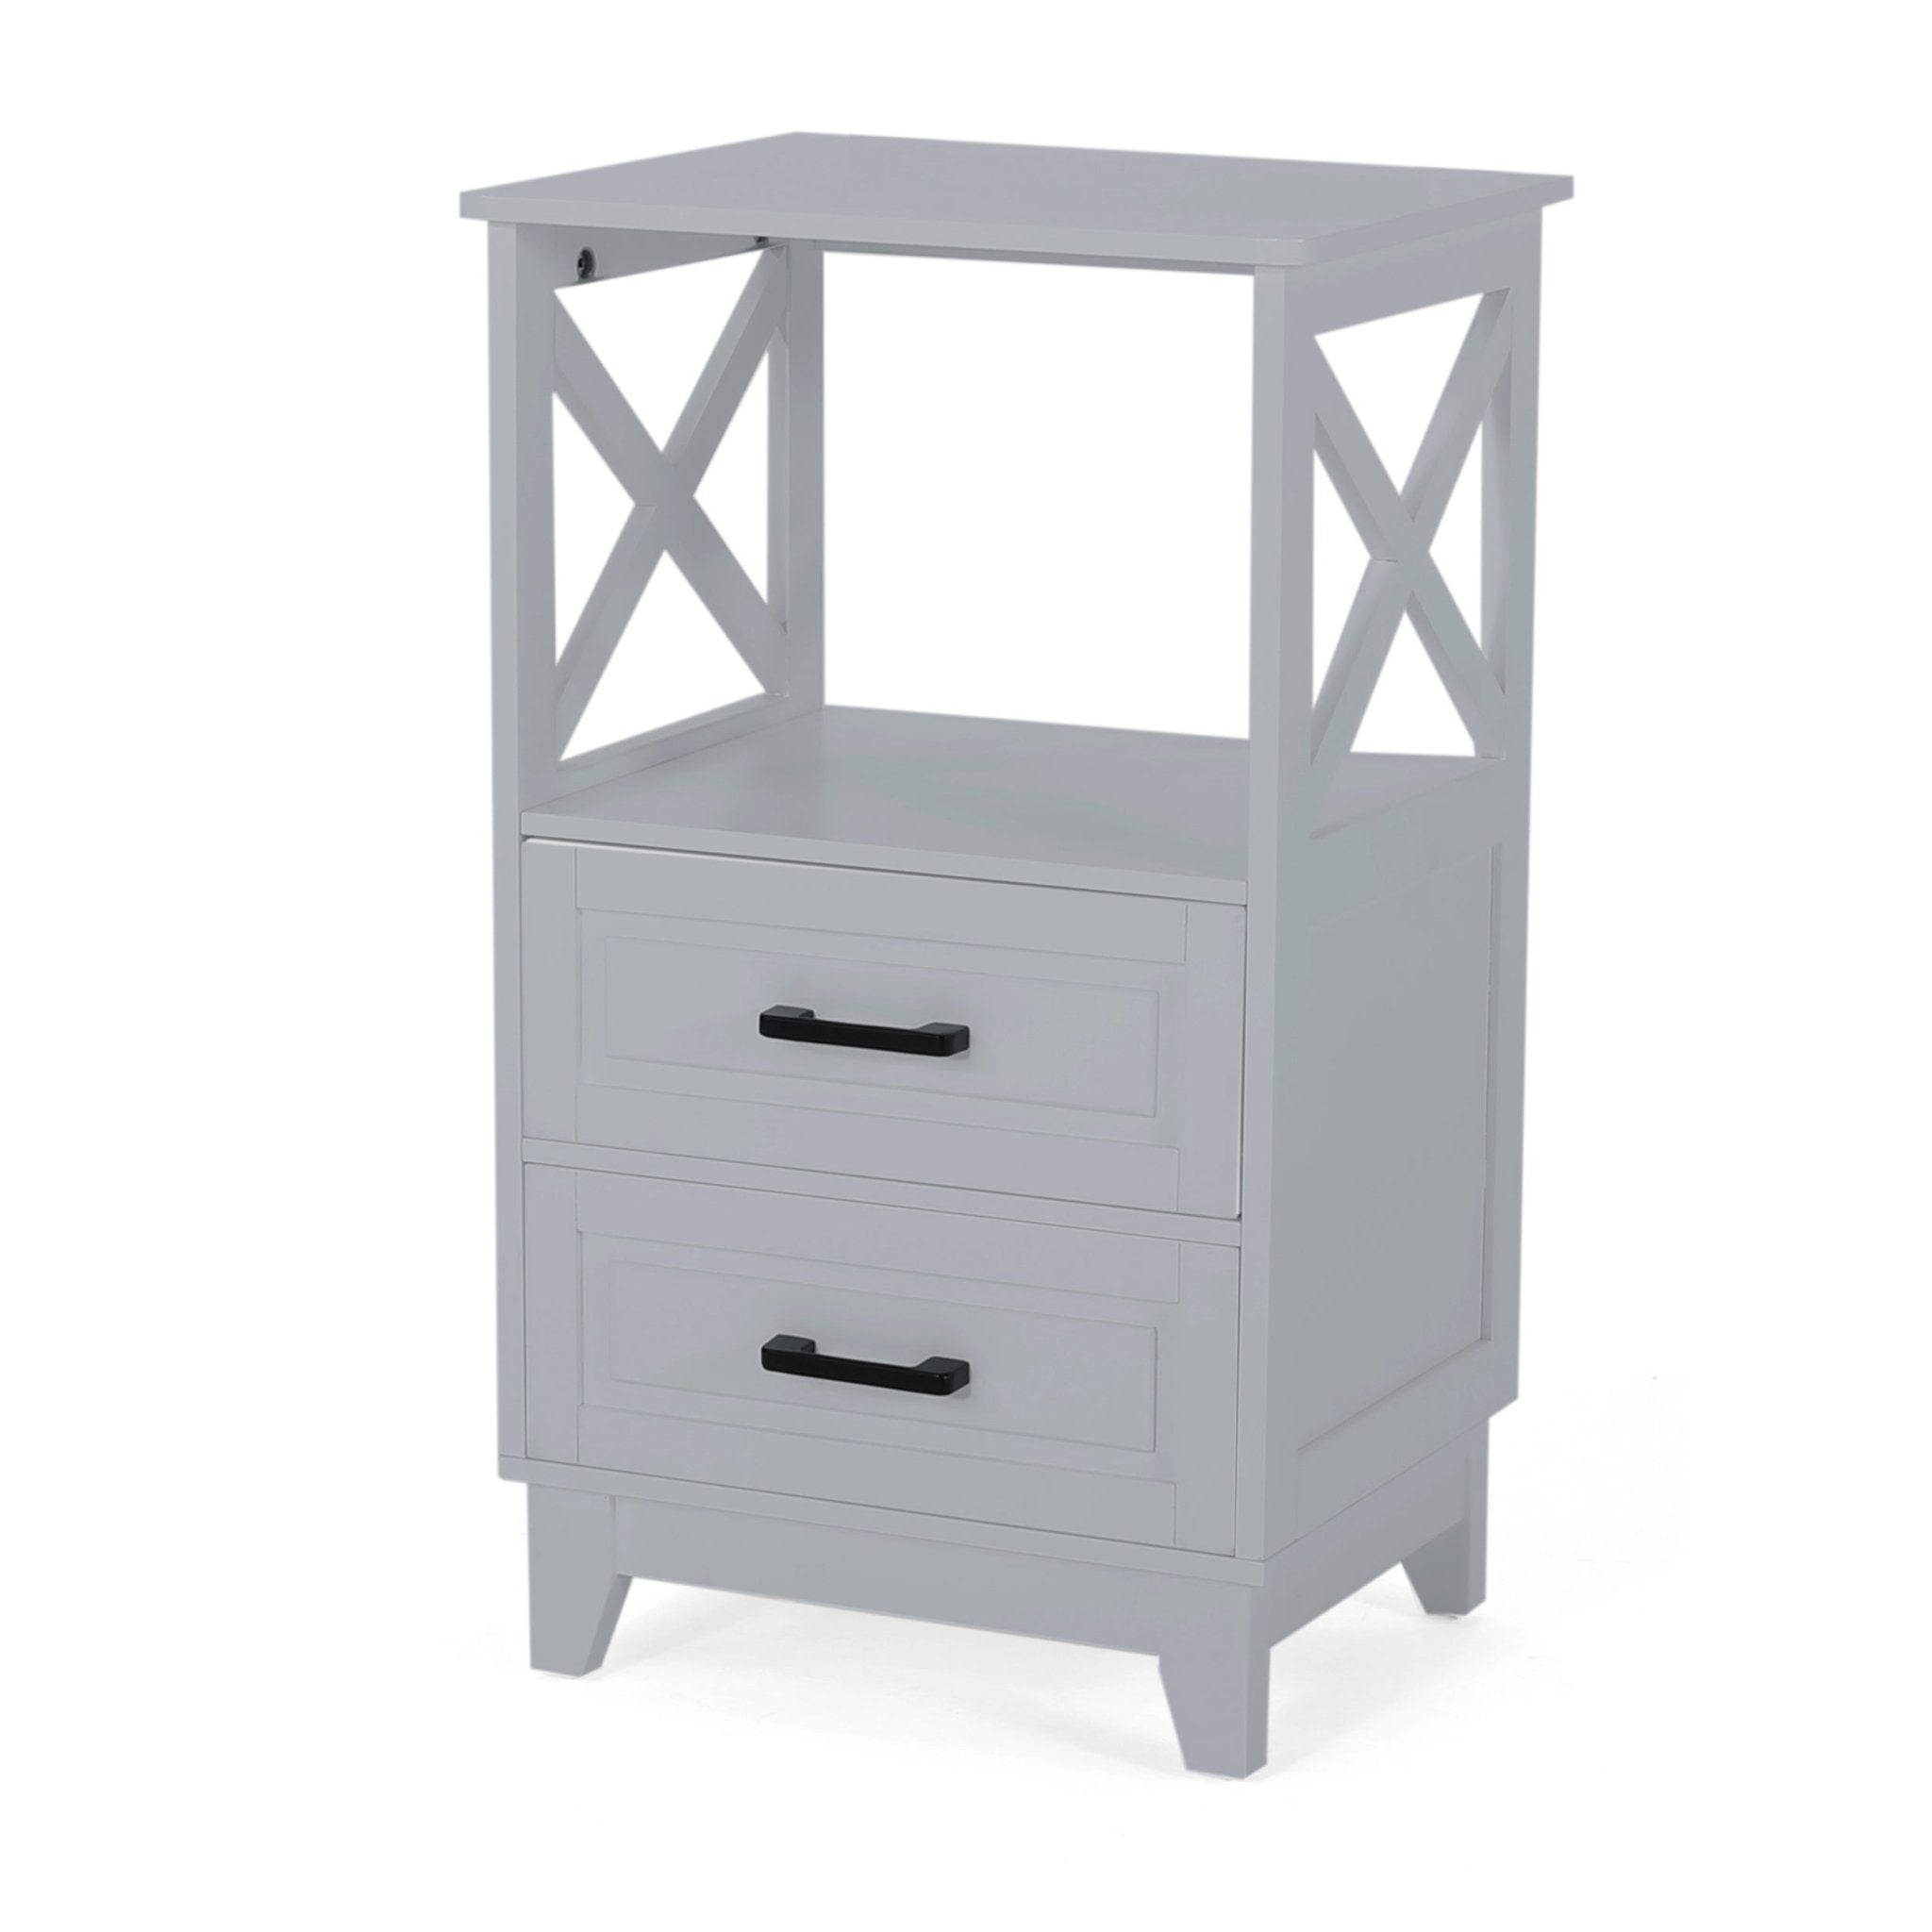 2 Drawer Bathroom Cabinet - Tuesday Morning-Furniture | Cabinets & Storage | Storage Cabinets & Lockers